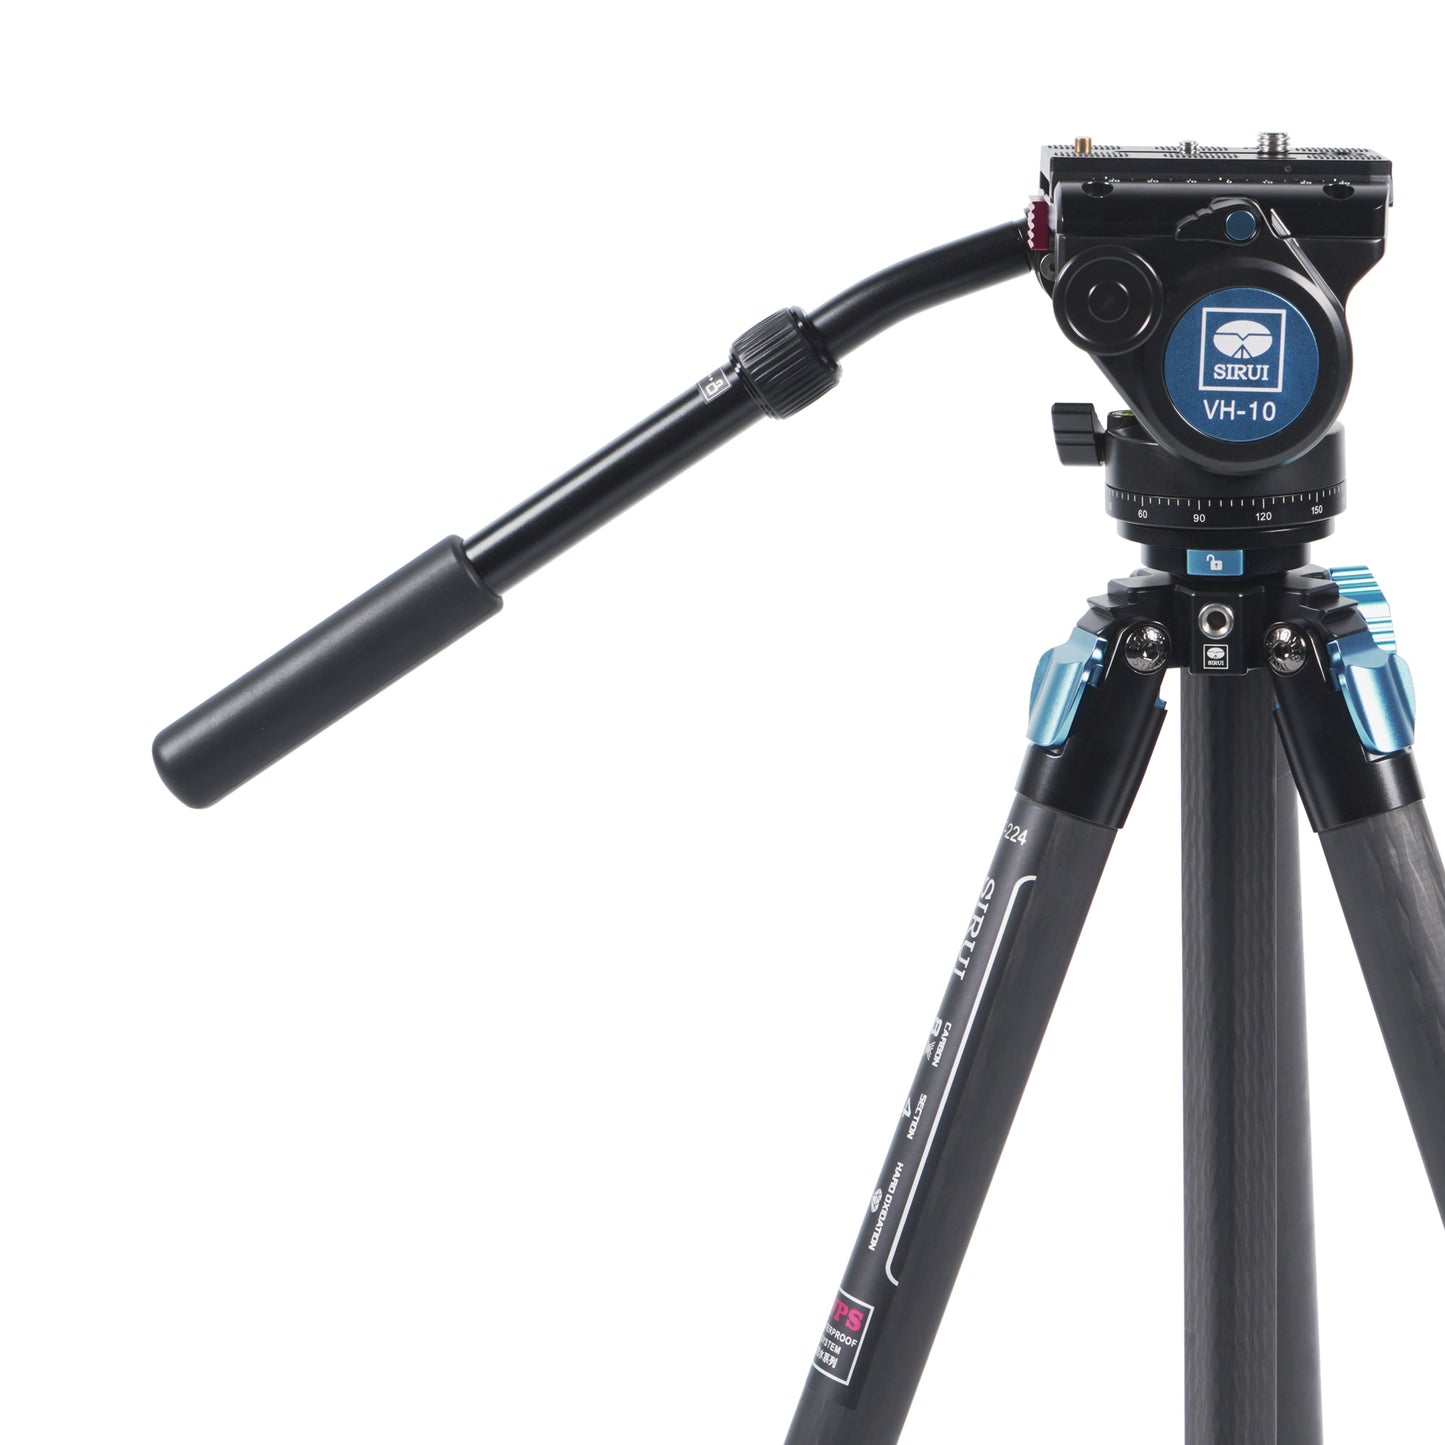 SIRUI ST-224 Superb Travel tripod carbon 185 cm with video head VH-10 - waterproof - ST series